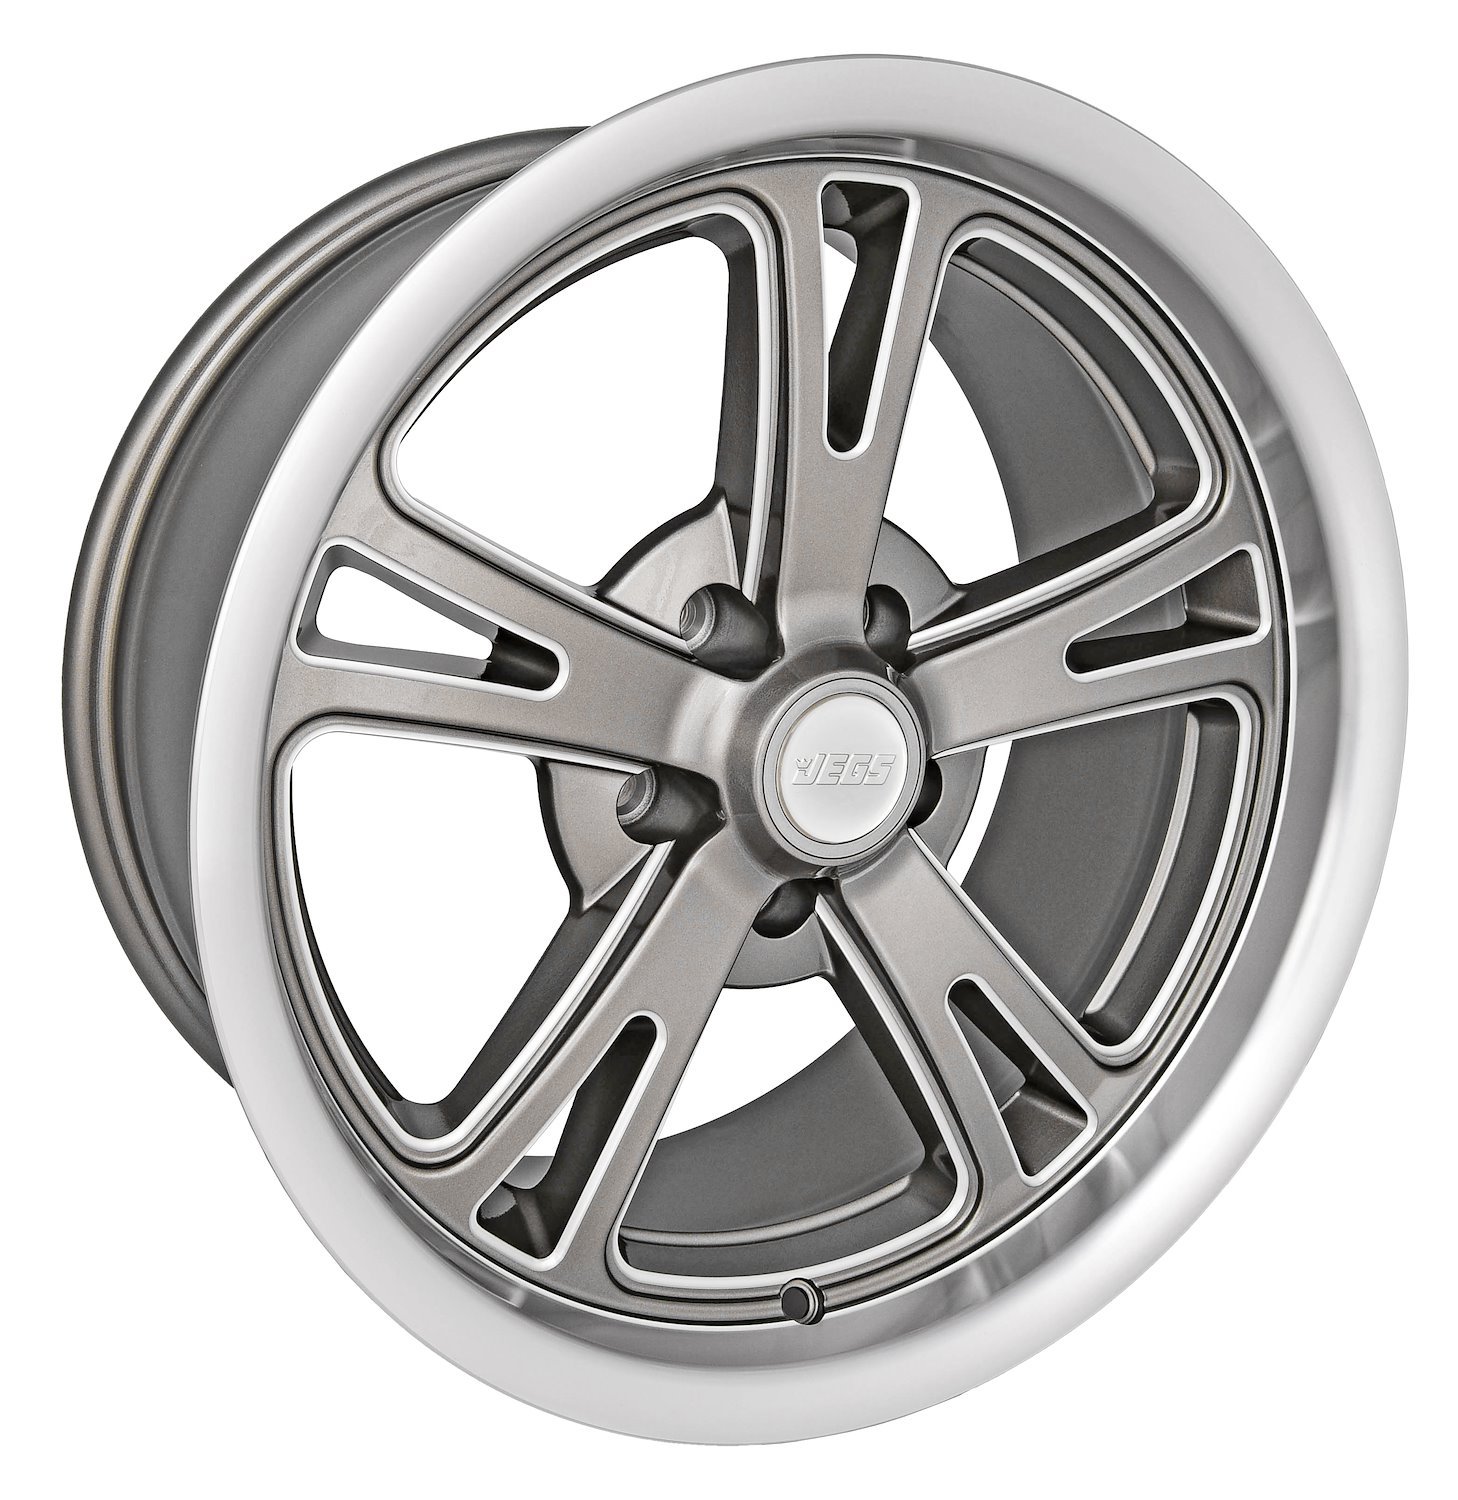 JV-1 Wheel [Size: 18" x 8"] Grey Spokes with Milled Outer Lip